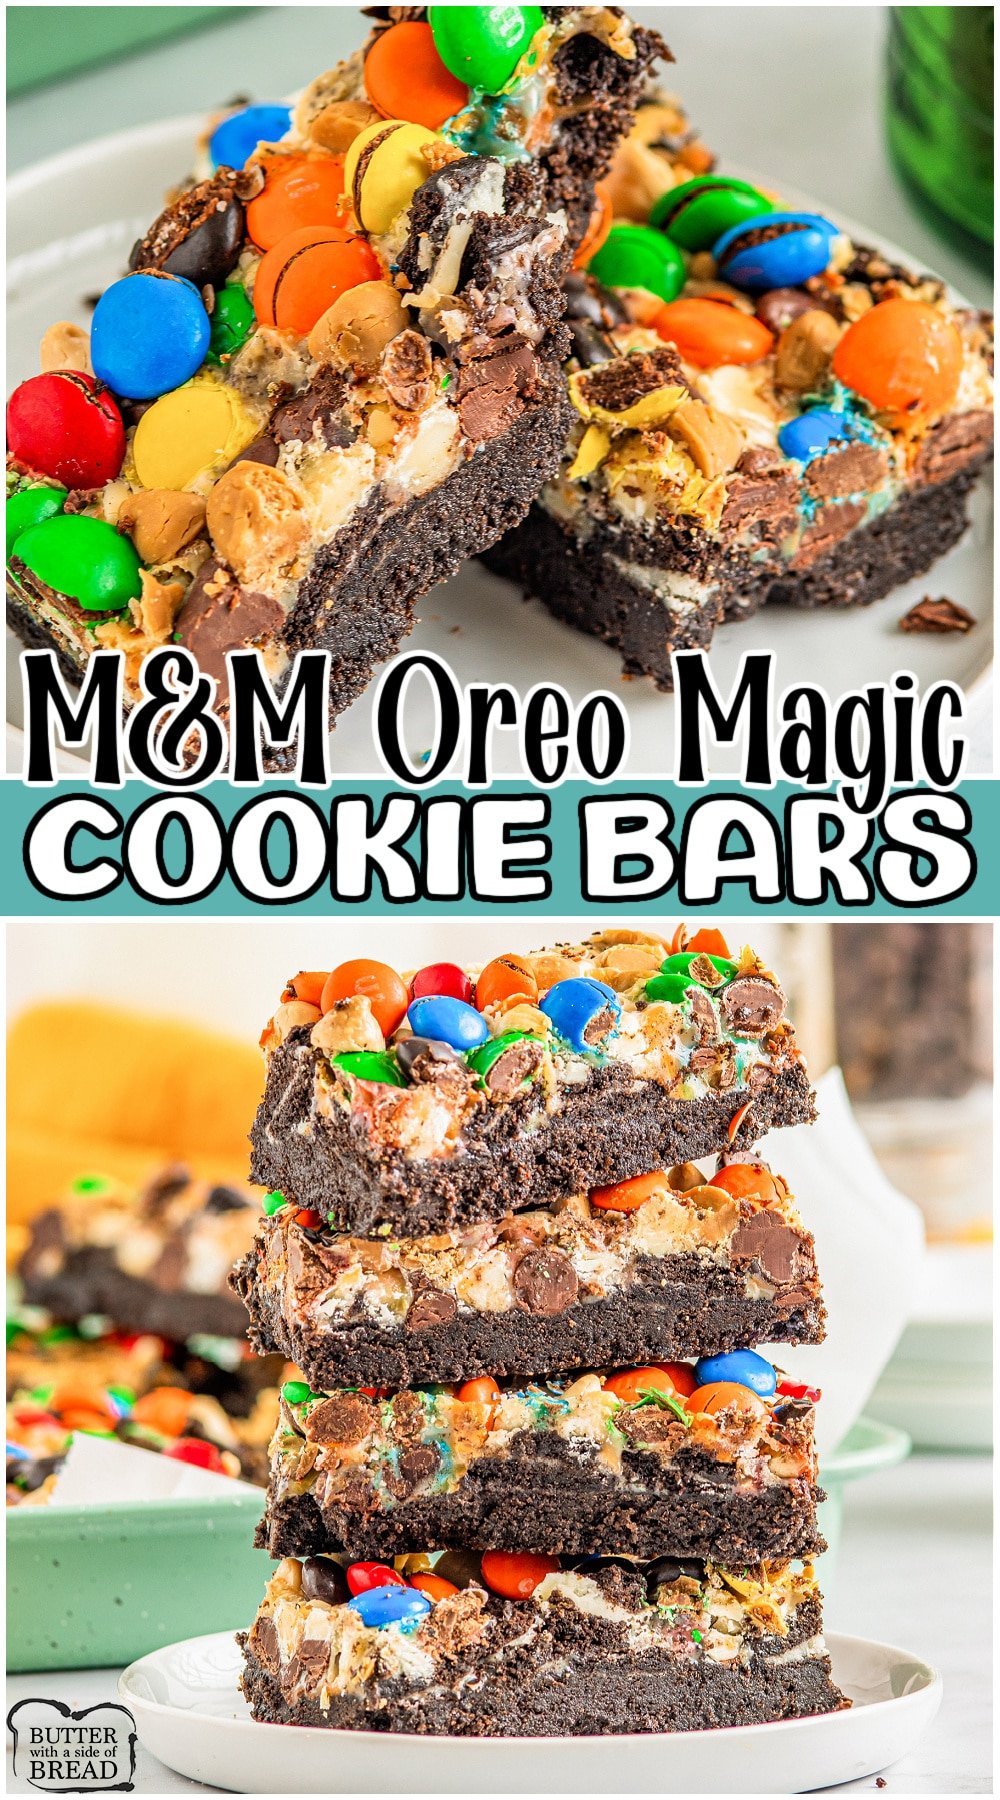 Oreo Magic Cookie Bars are loaded with Oreos, M&Ms, butterscotch chips & chocolate! These 7 layer cookie bars made with Oreos and M&M's for a fun twist on a classic dessert! 